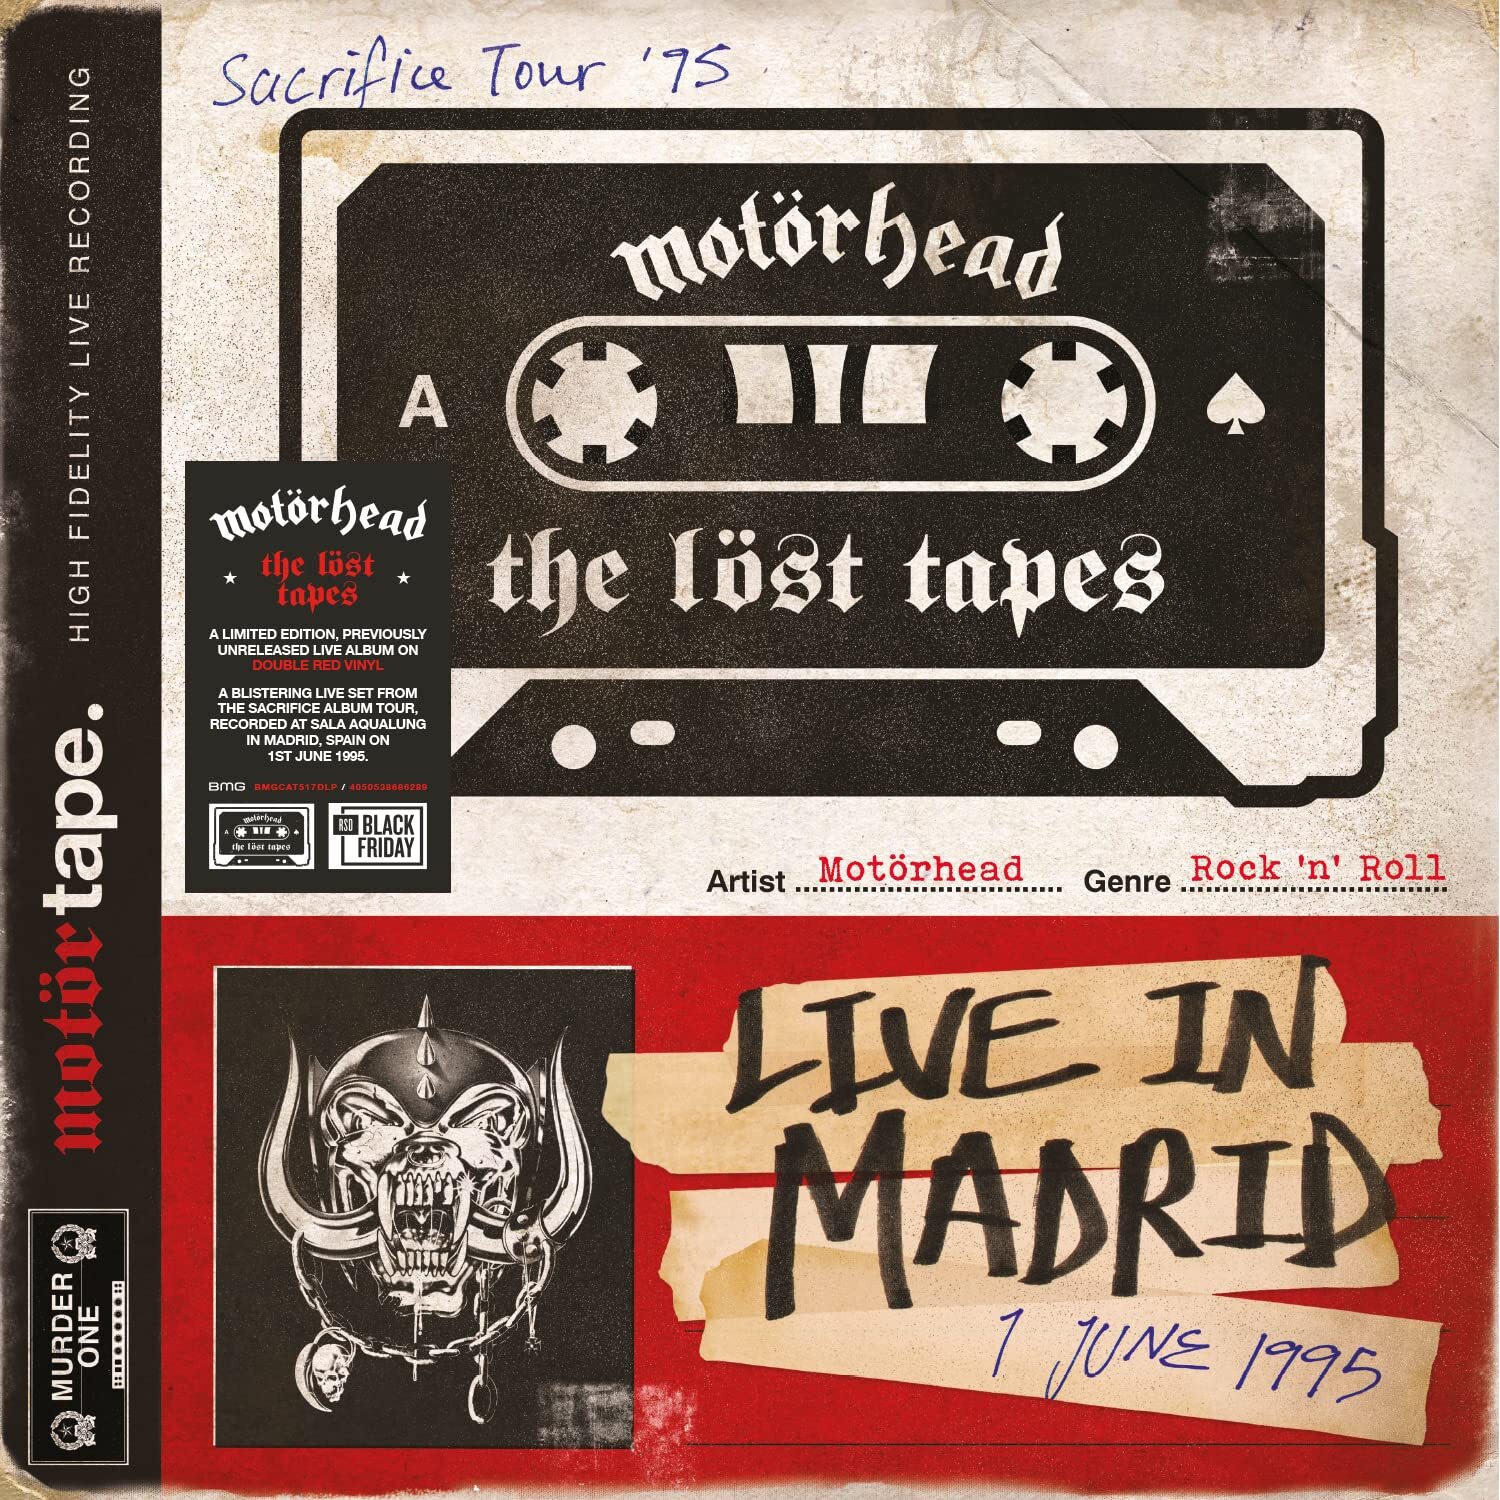 Рок Warner Music Motorhead - The Lost Tapes Vol. 1 Live In Madrid 1 June 1995 (Limited Edition Coloured Vinyl 2LP)